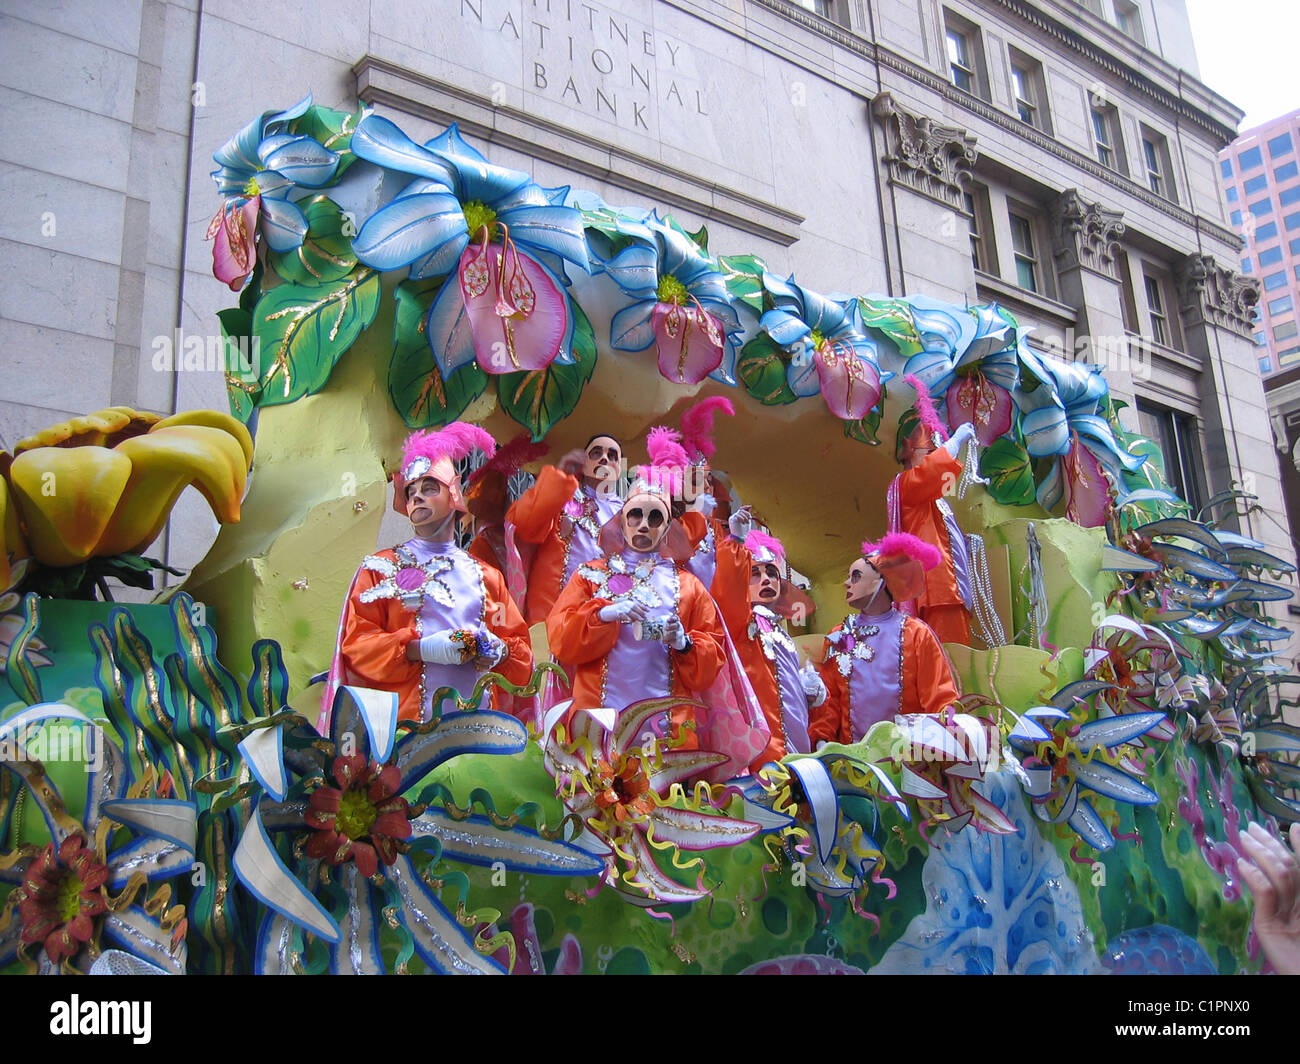 People in brightly coloured costumes on a float at the traditional Mardi Gras festival, New Orleans, USA. Stock Photo